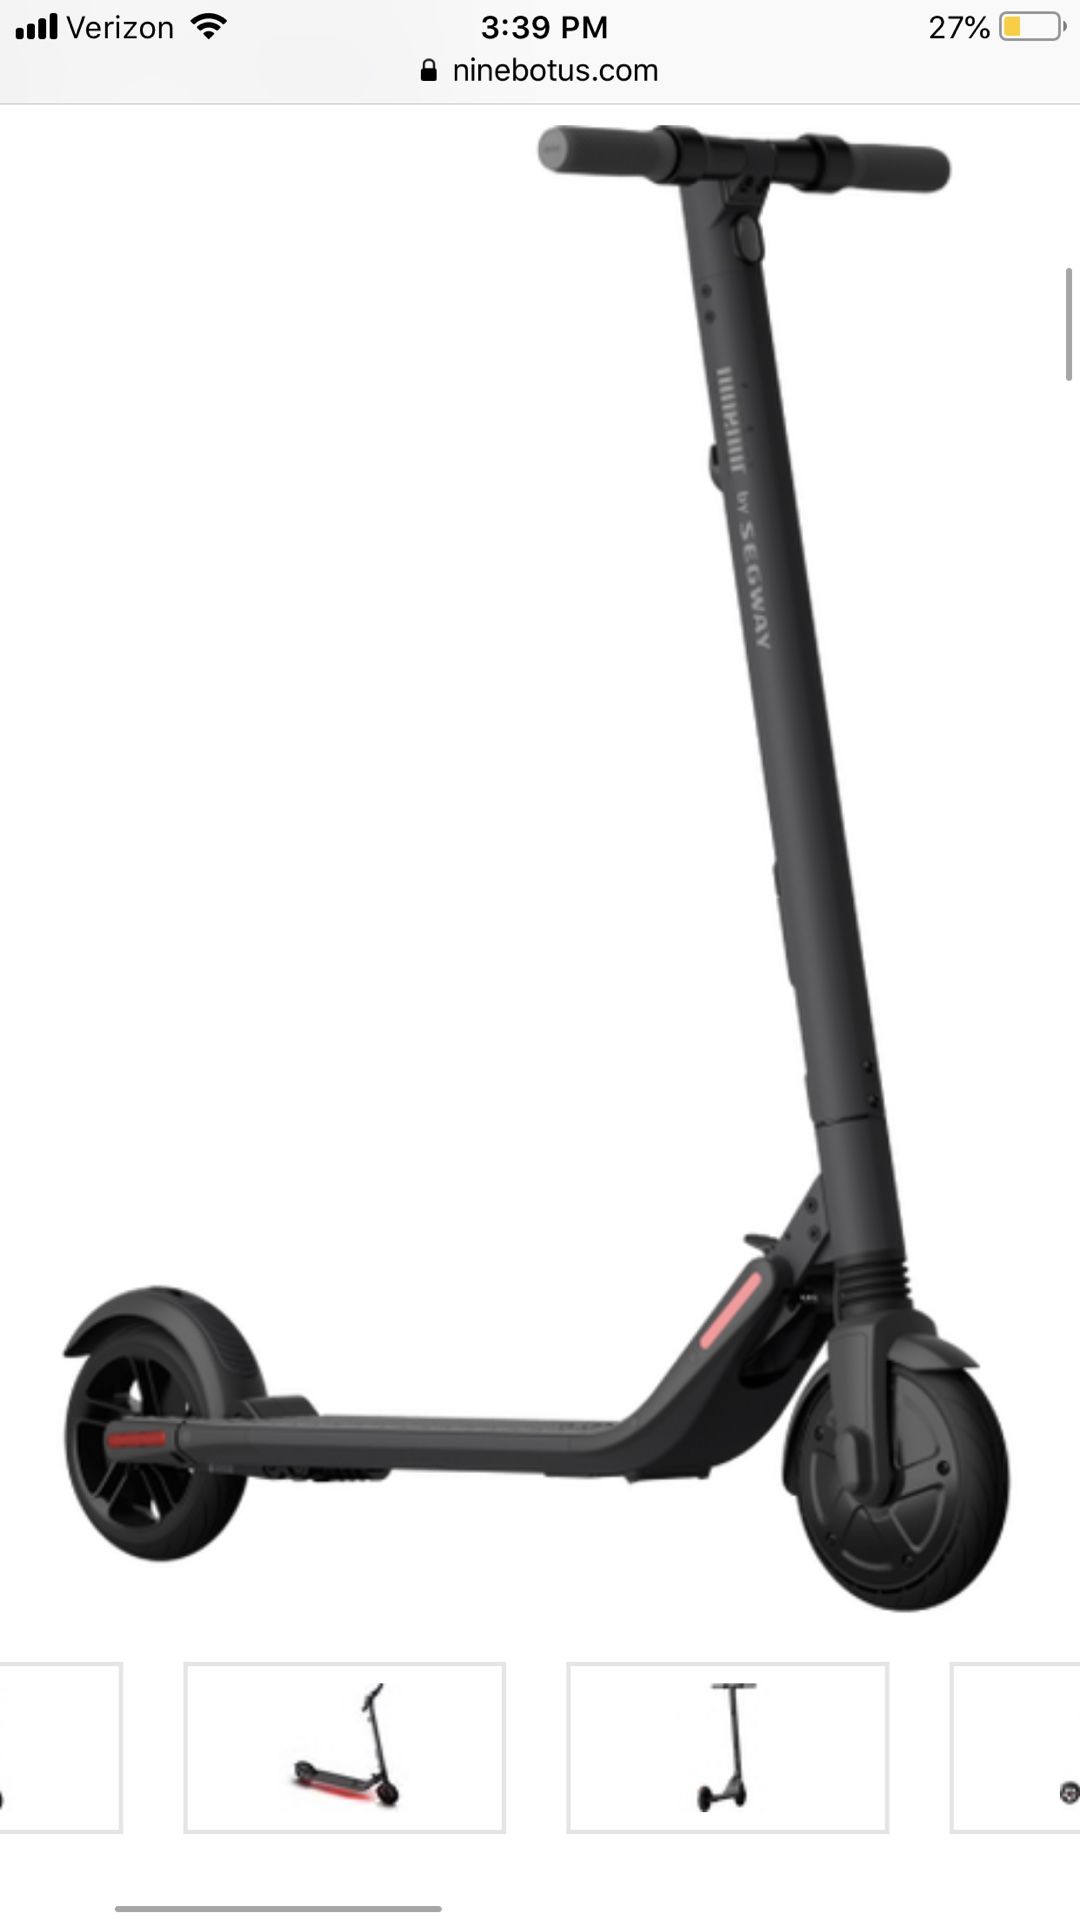 Ninebot scooter